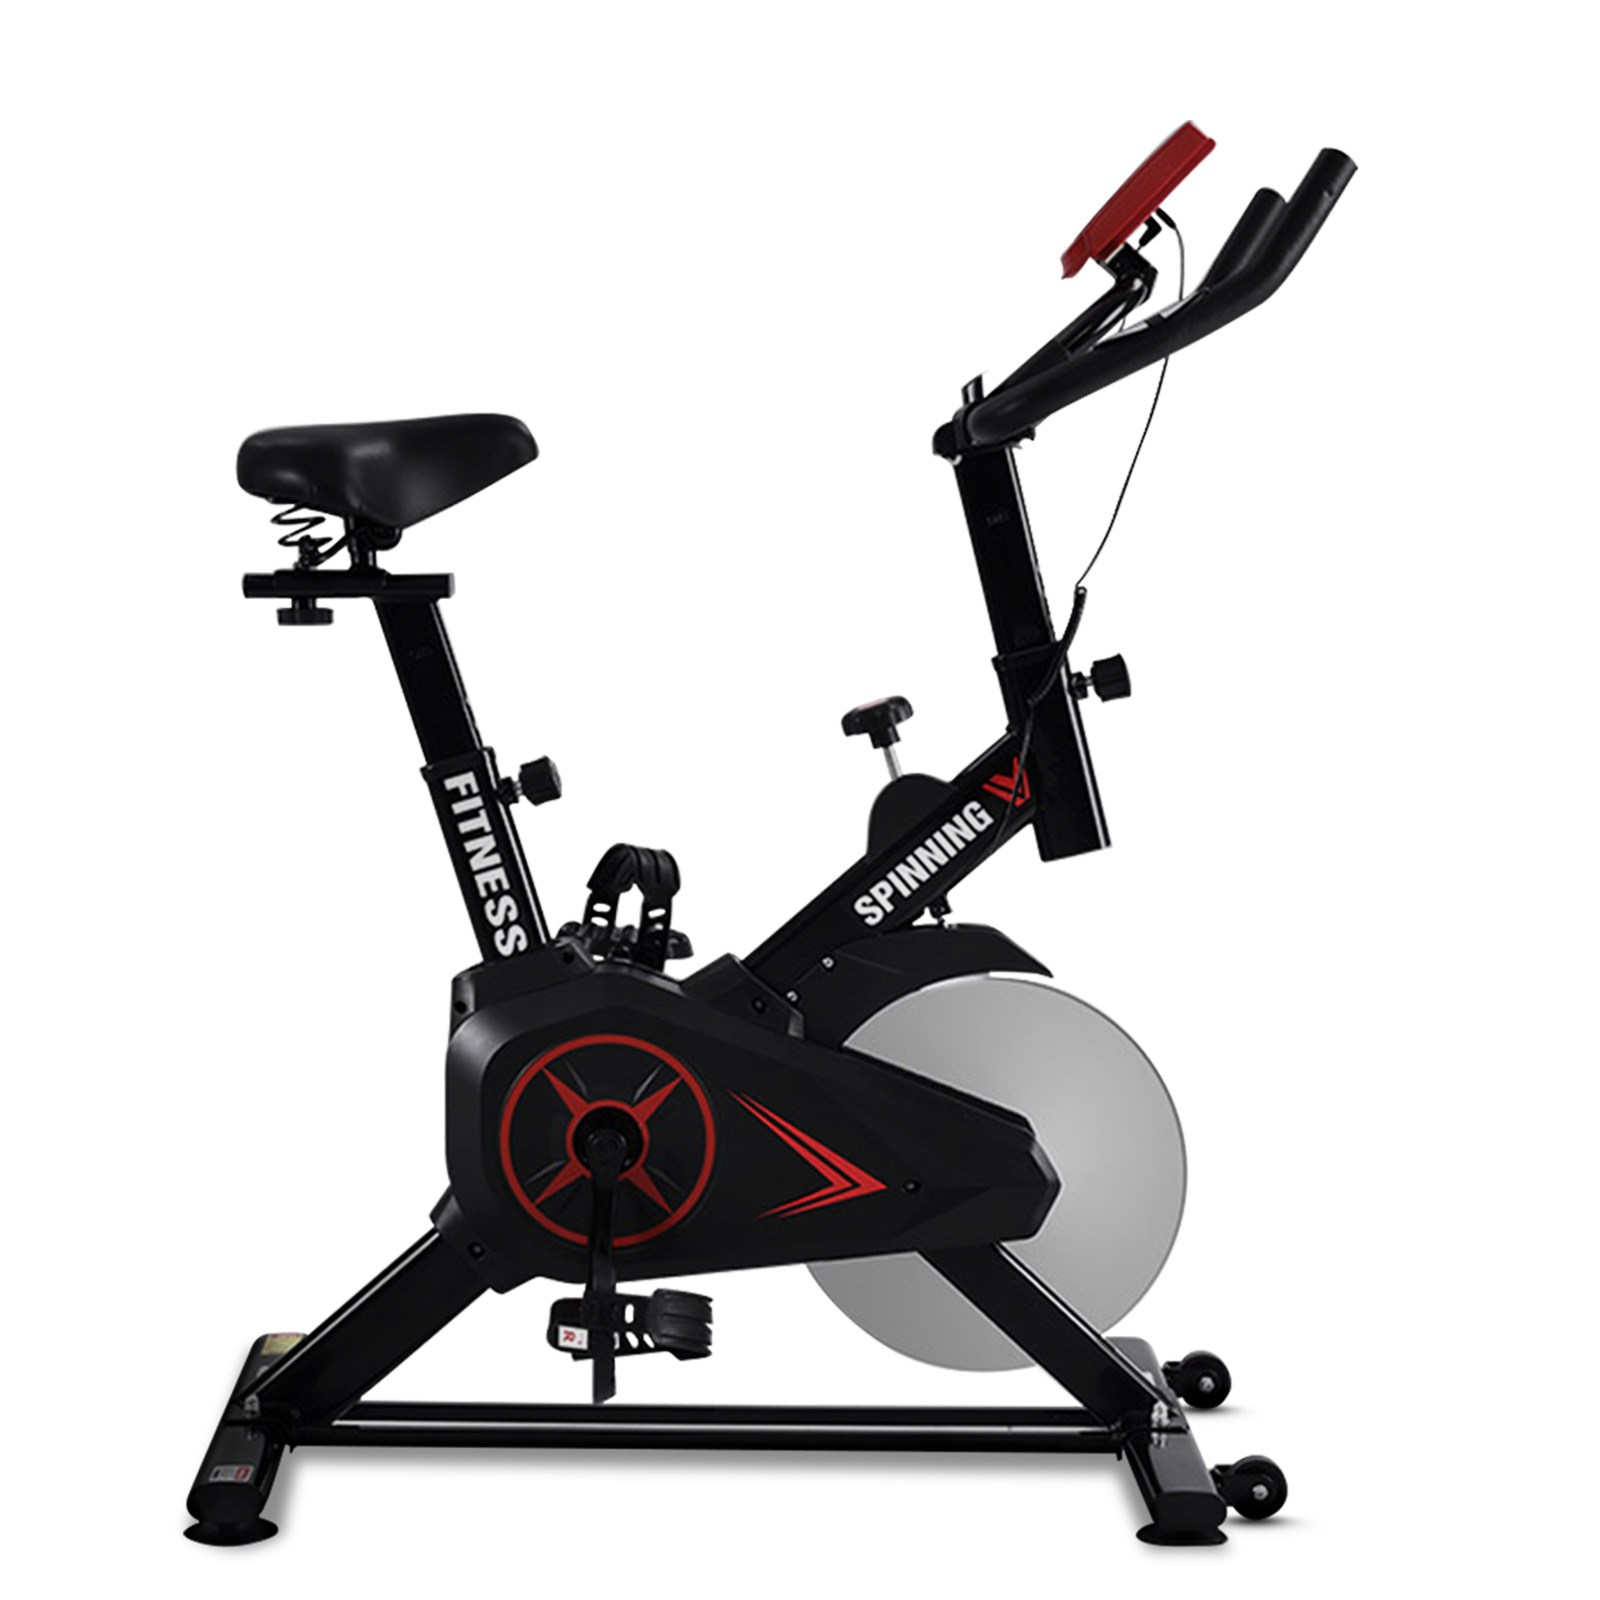 Exercise Spin Bike Flywheel Home Workout Gym Fitness Commercial Phone Holder Black